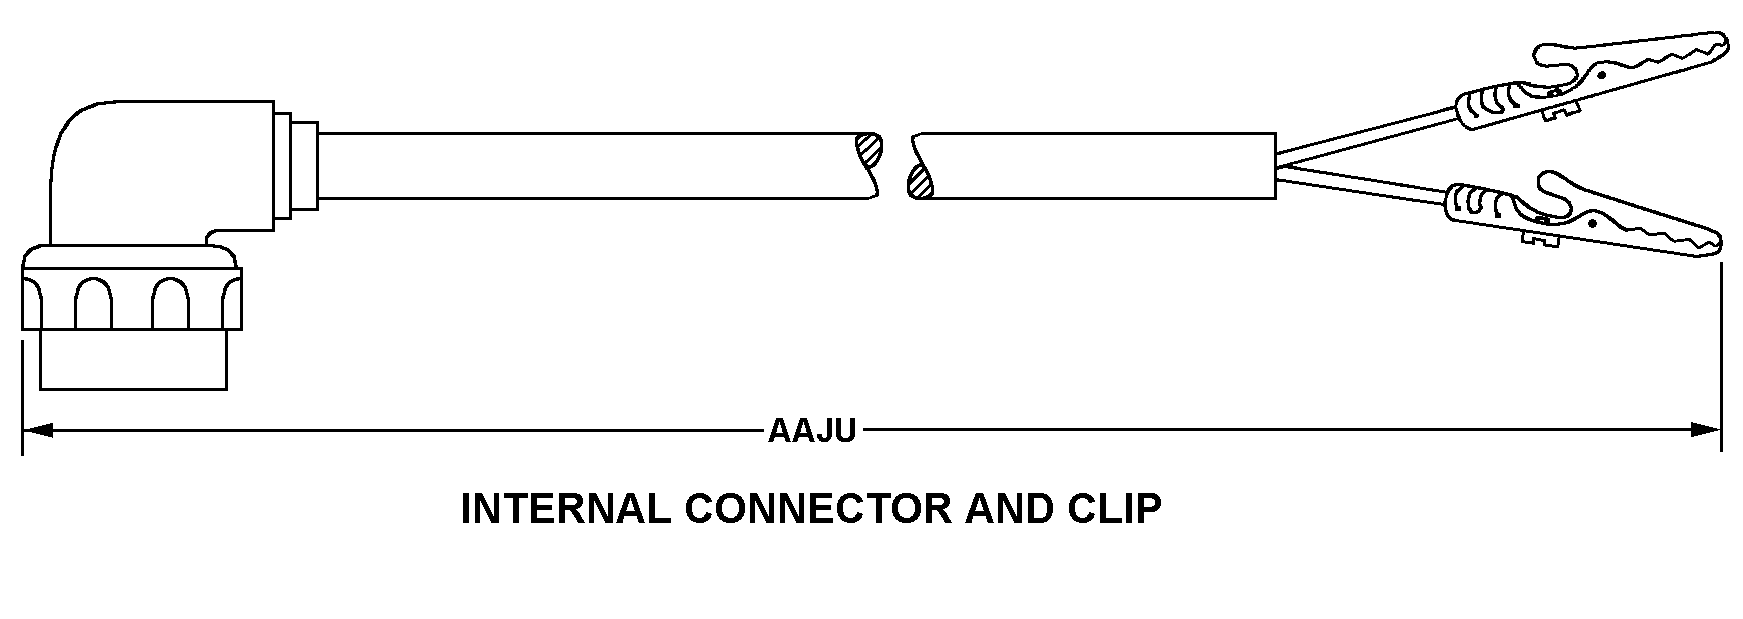 INTERNAL CONNECTOR AND CLIP style nsn 6150-00-926-6370